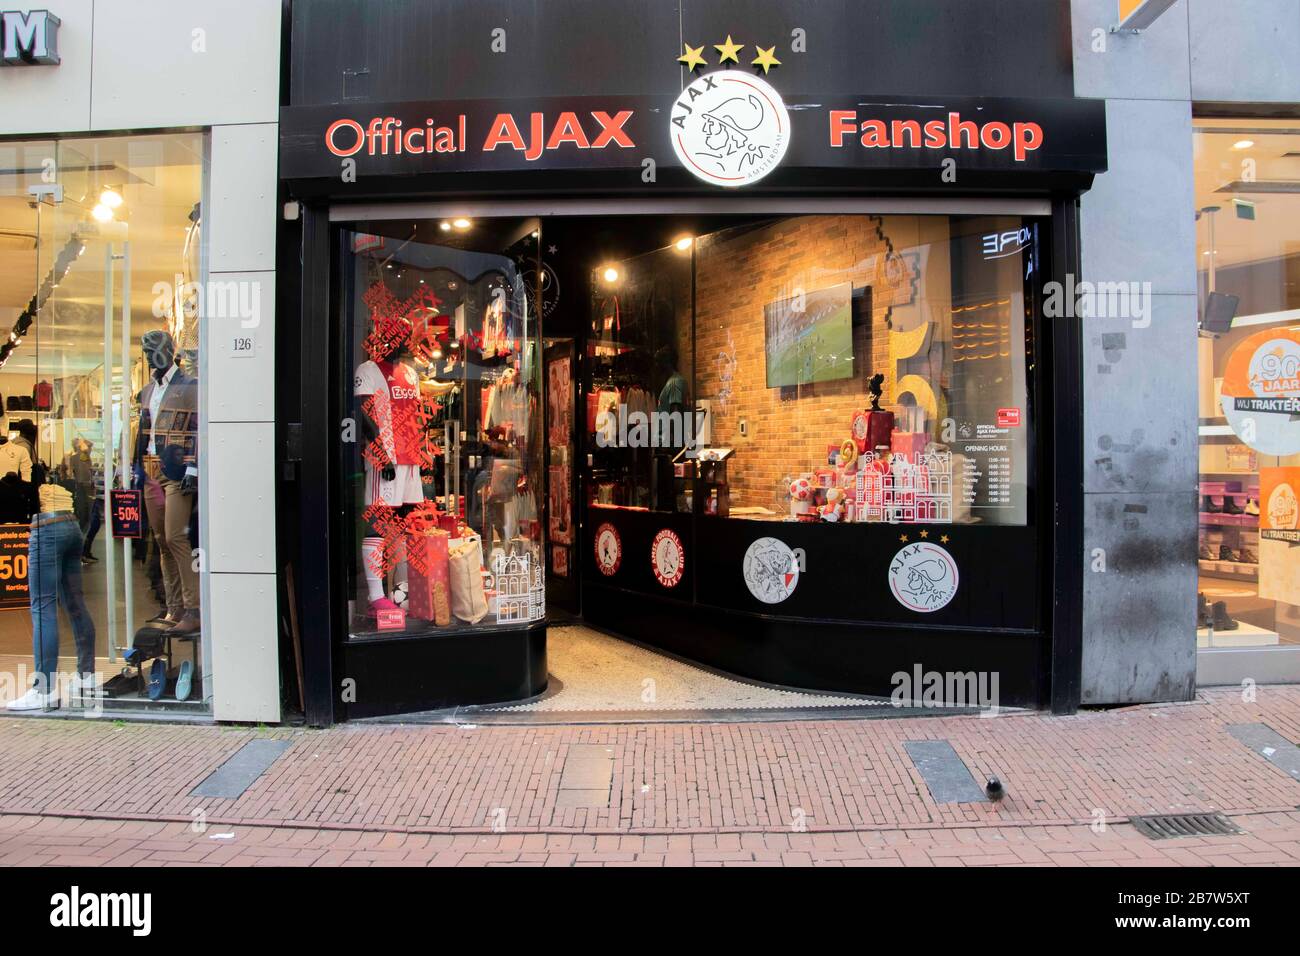 Official Ajax Fan Shop At Amsterdam The Netherlands 2019 Stock Photo - Alamy